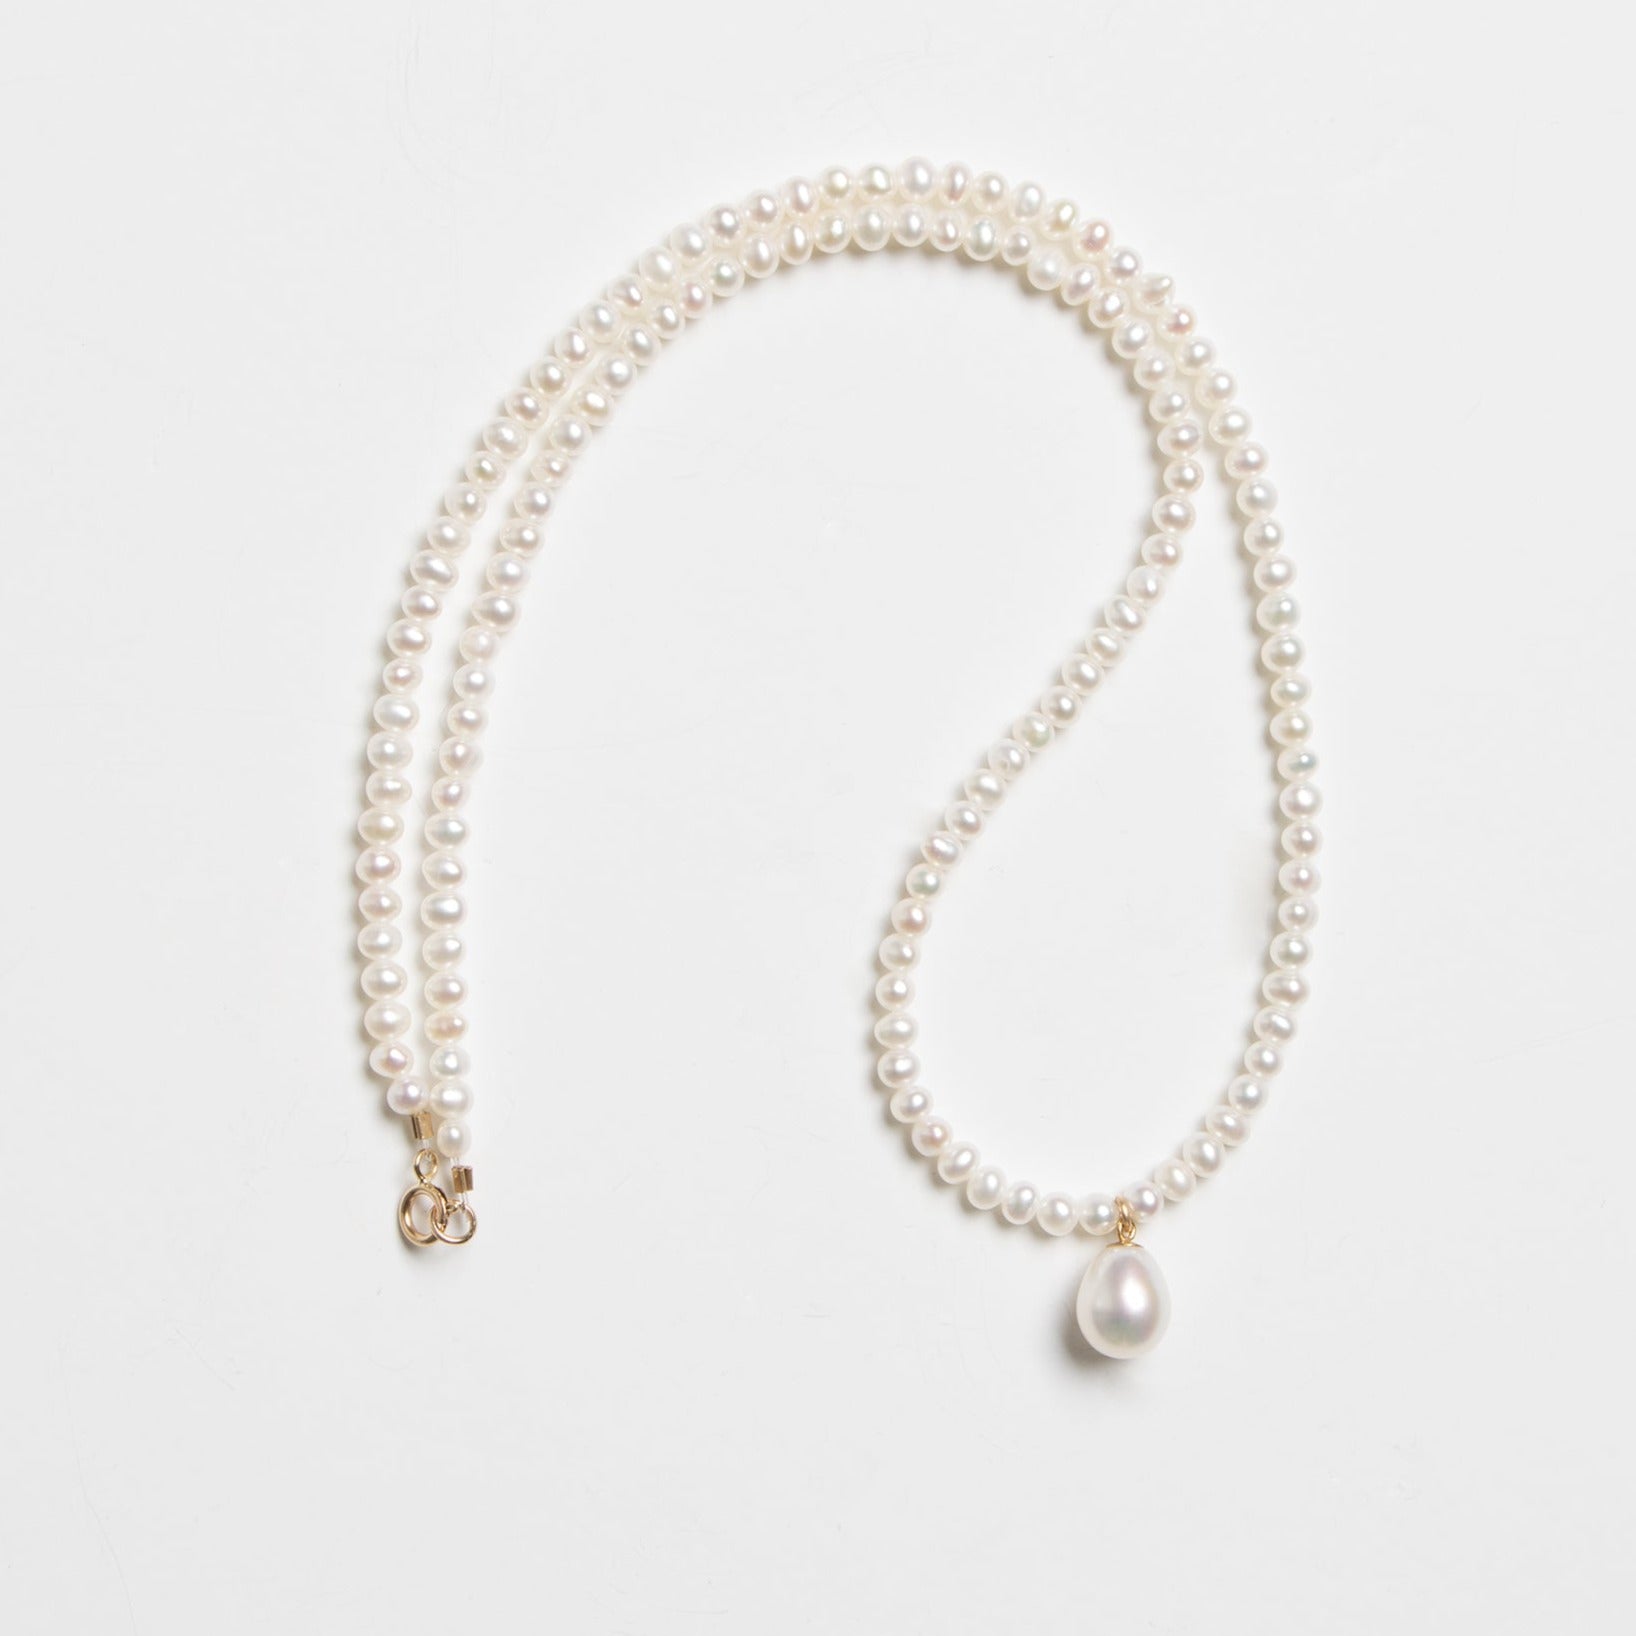 Tiny Pearls & Pendant Necklace 14K Gold